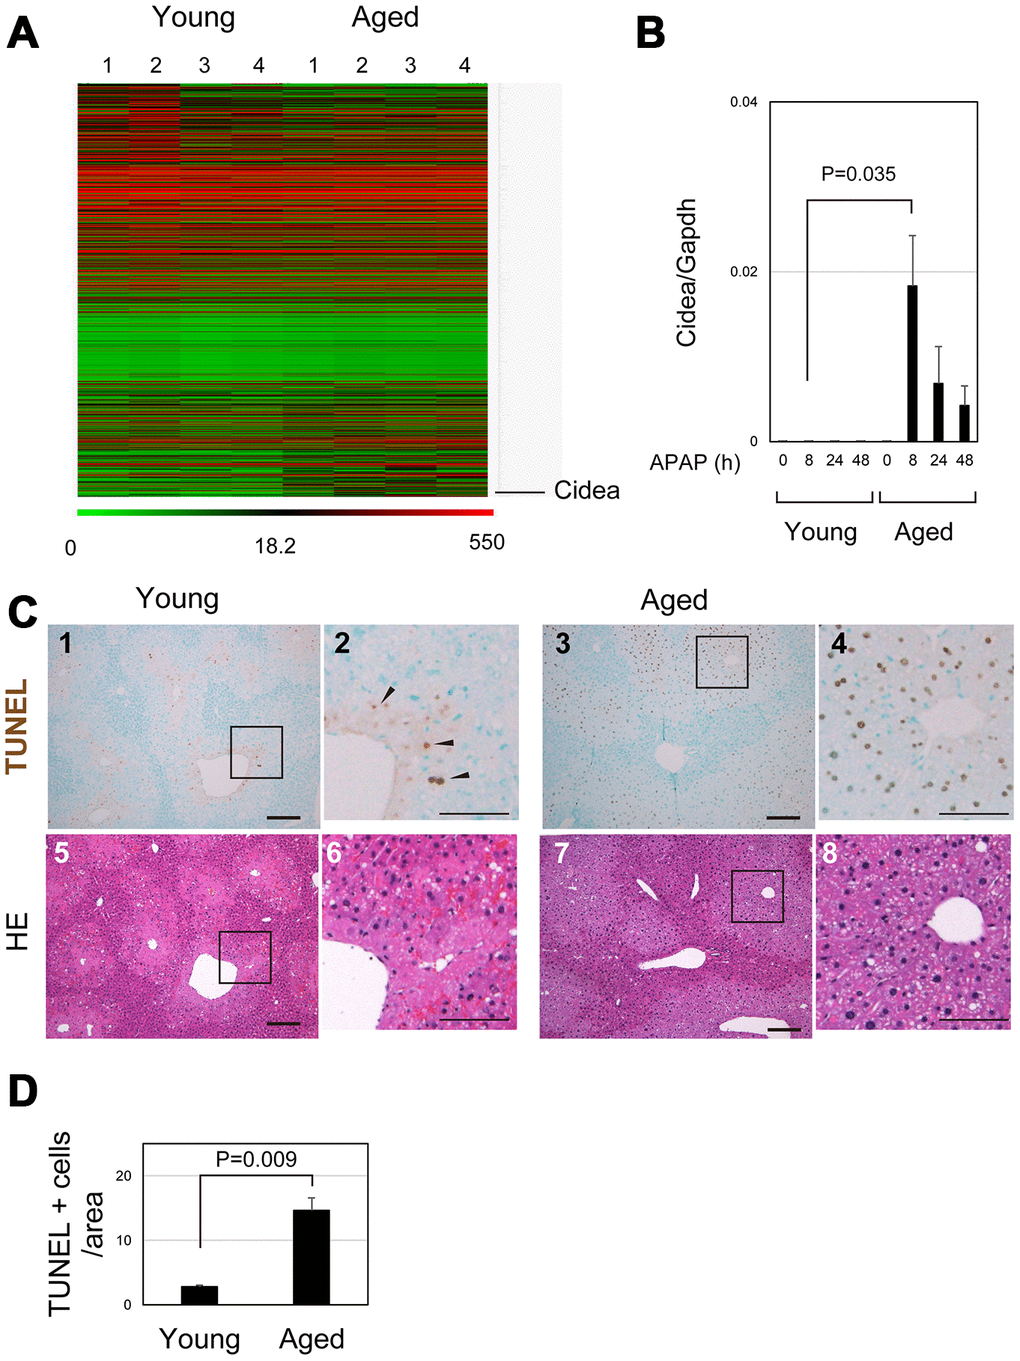 Apoptosis is promoted in aged liver. (A) Global gene expression profiles of young and aged livers at 8 hours after APAP injury. Cidea is listed as the most upregulated gene in aged livers 8 hours after APAP administration. Gene expression profiles were analyzed using microarray analysis. (B) Cidea is induced in aged liver tissue after APAP injury. Quantitative PCR analysis demonstrates that Cidea is significantly upregulated at 8 hours after APAP injury, specifically in aged livers. The graph shows average values with SEMs. (C) TUNEL staining of young and aged livers at 8 hours after APAP injury. APAP induces hepatocyte necrosis around the CV, and dead hepatocytes are mostly de-nucleated in young mice at 8 hours. In addition, a small number of TUNEL+ hepatocytes exist in the necrotic area. By contrast, hepatocytes around CV still possess their nuclei (panels 7 and 8), and they are mostly TUNEL+ (panels 3 and 4) in aged mice. Bars in panels 1, 3, 5, and 7, and panels 2, 4, 6, and 8 represent 50 and 100 μm, respectively. (D) Increase of TUNEL+ hepatocytes in aged livers. TUNEL+ hepatocytes within the distance of 100 μm from the CV is more in aged livers than those in young ones.